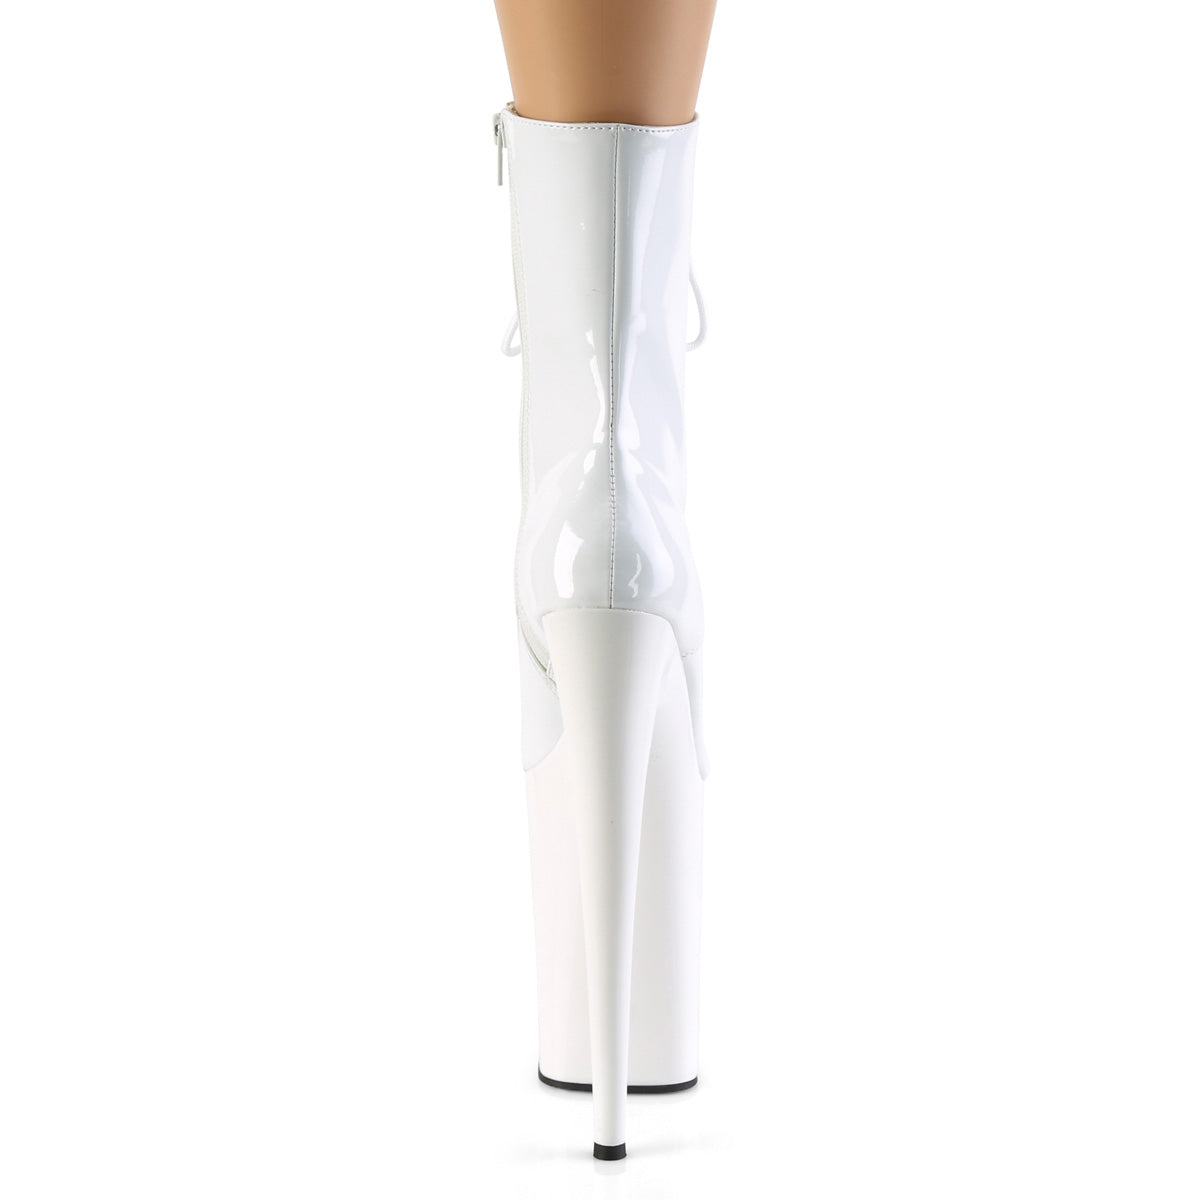 INFINITY-1020 9" Heel White Patent Pole Dancing Platforms-Pleaser- Sexy Shoes Fetish Footwear